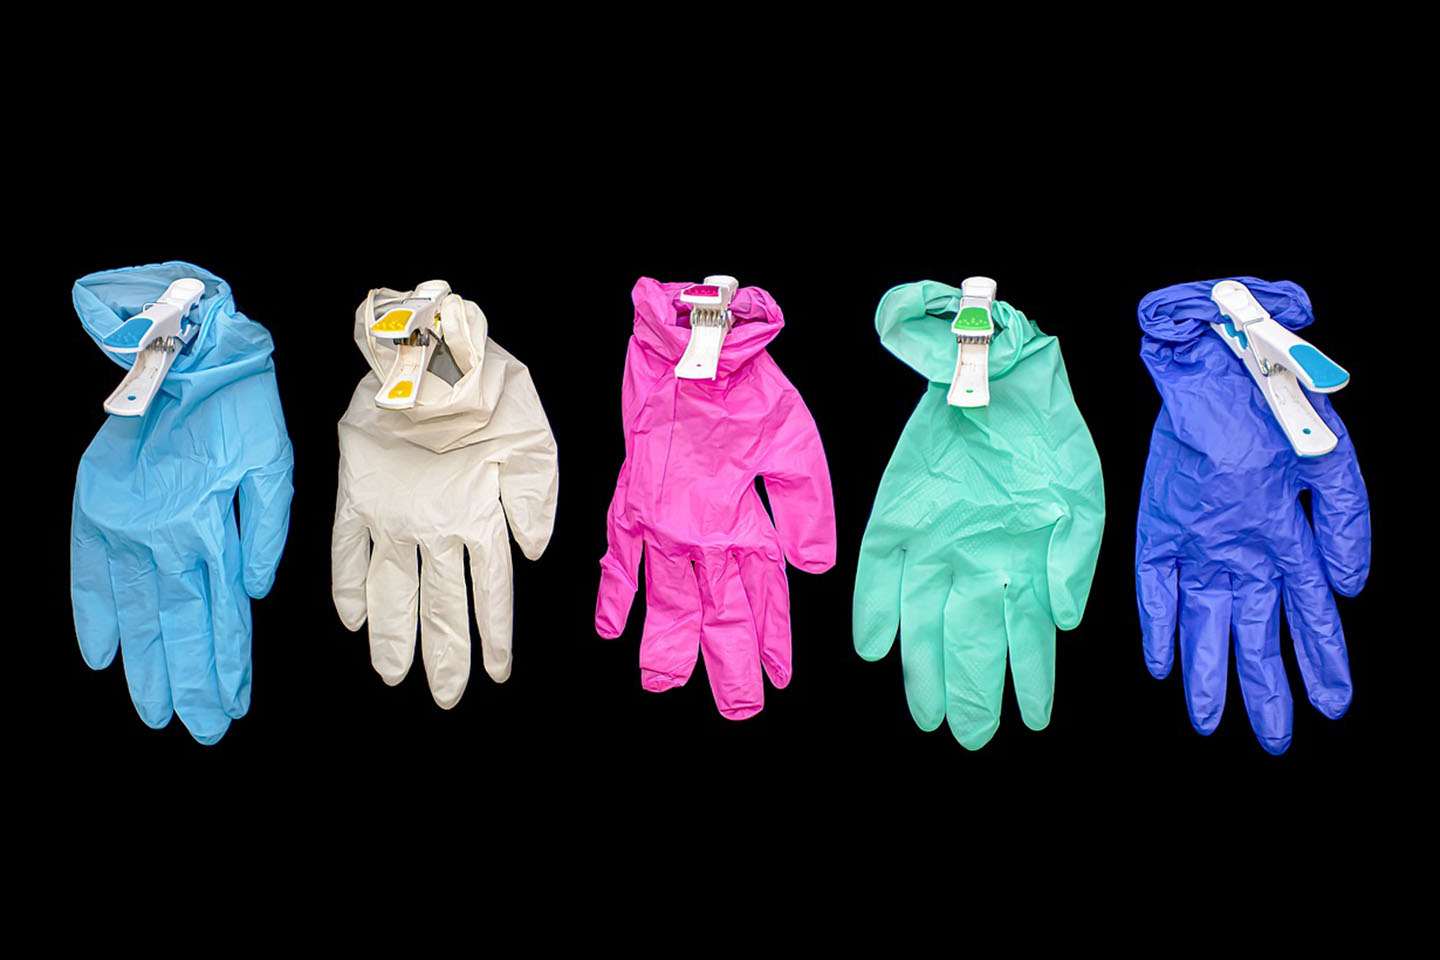 5 colored surgical gloves against black background